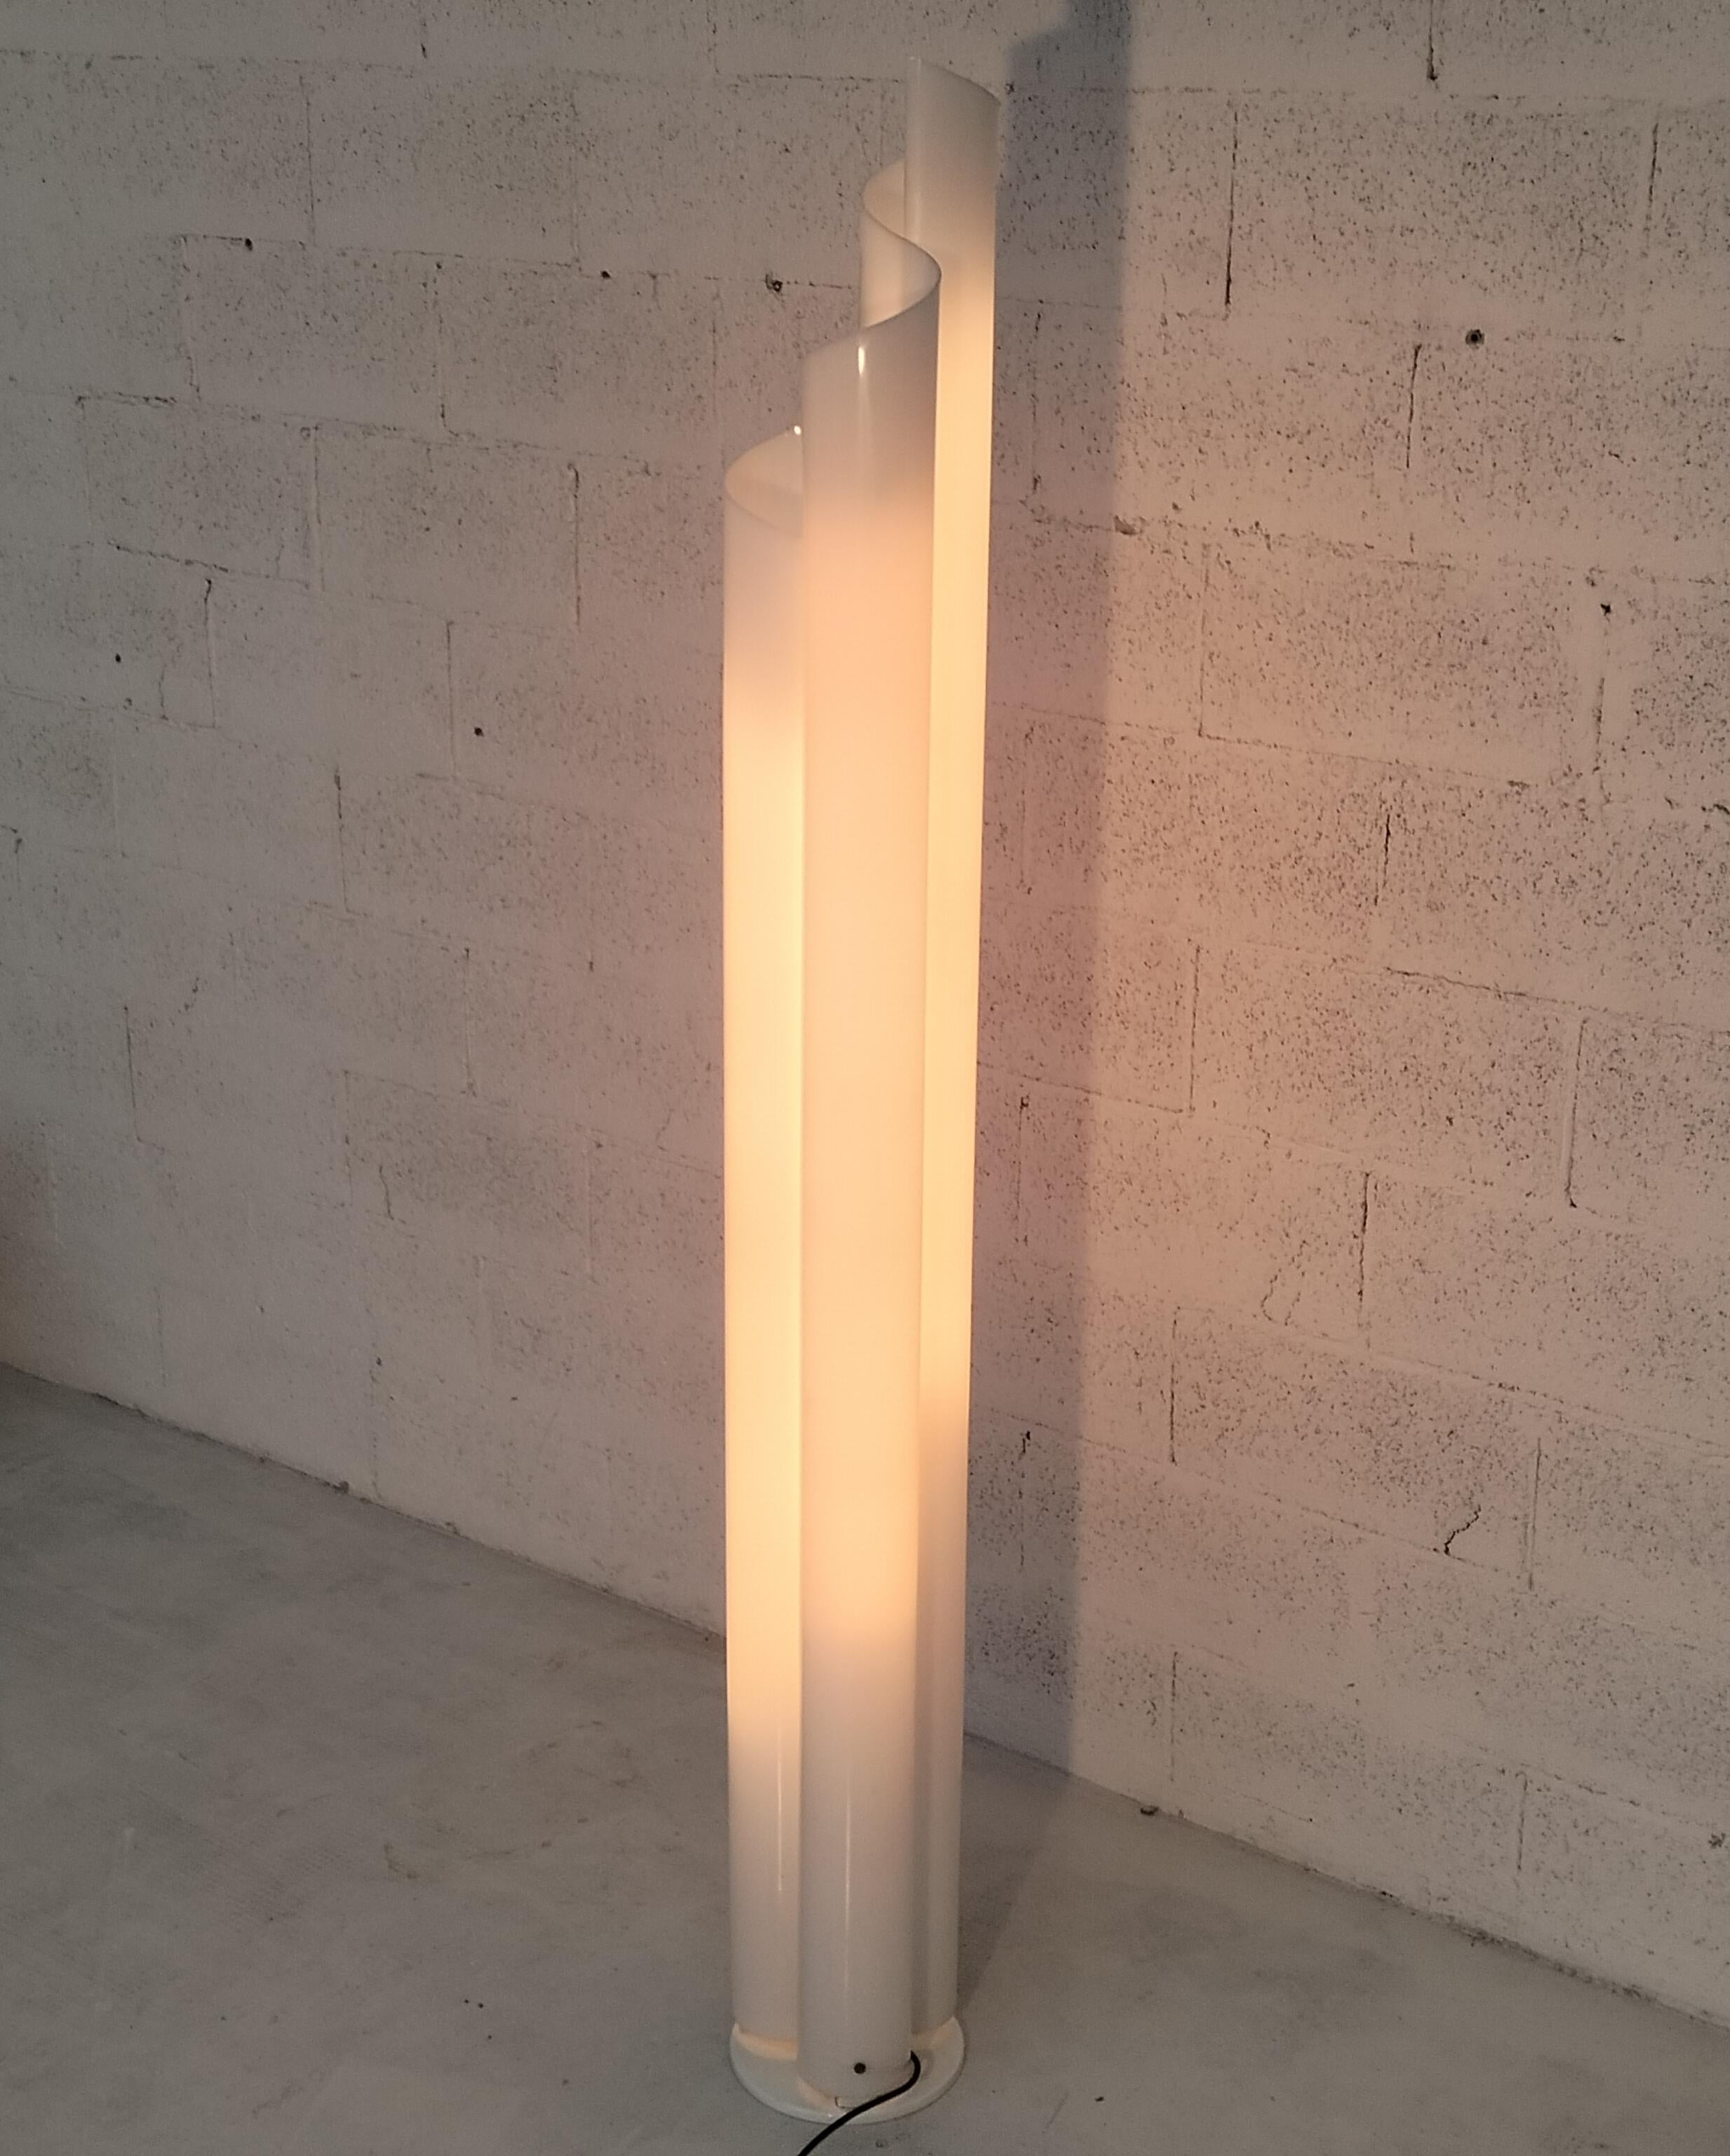 Late 20th Century Floor lamp Chimera by Vico Magistretti for Artemide  60s, 70’s